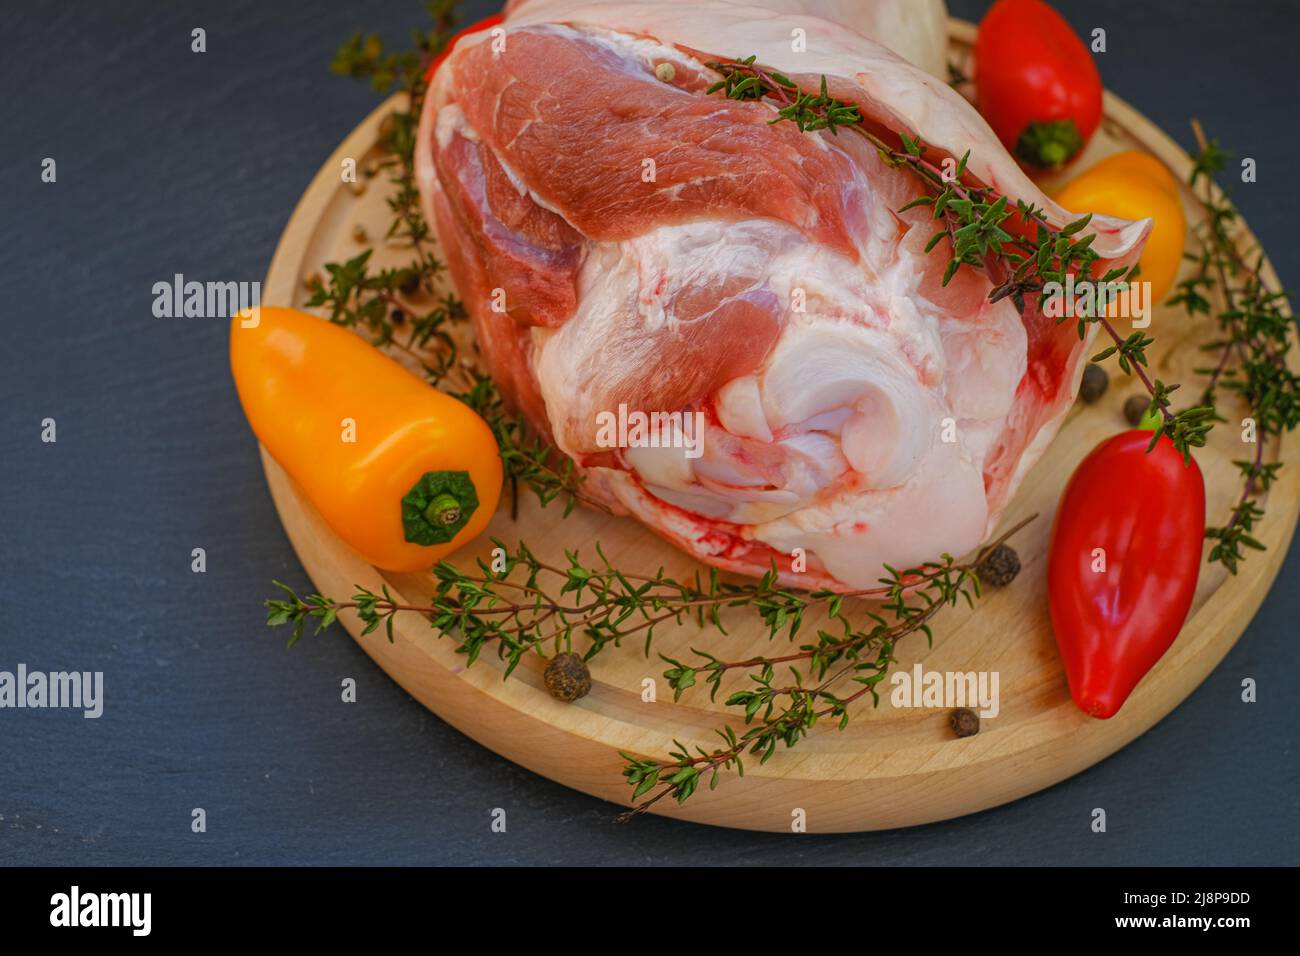 Pork meat on the bone, sweet fresh pepper and thyme herb on a round board on a slate background.Meat products. Stock Photo